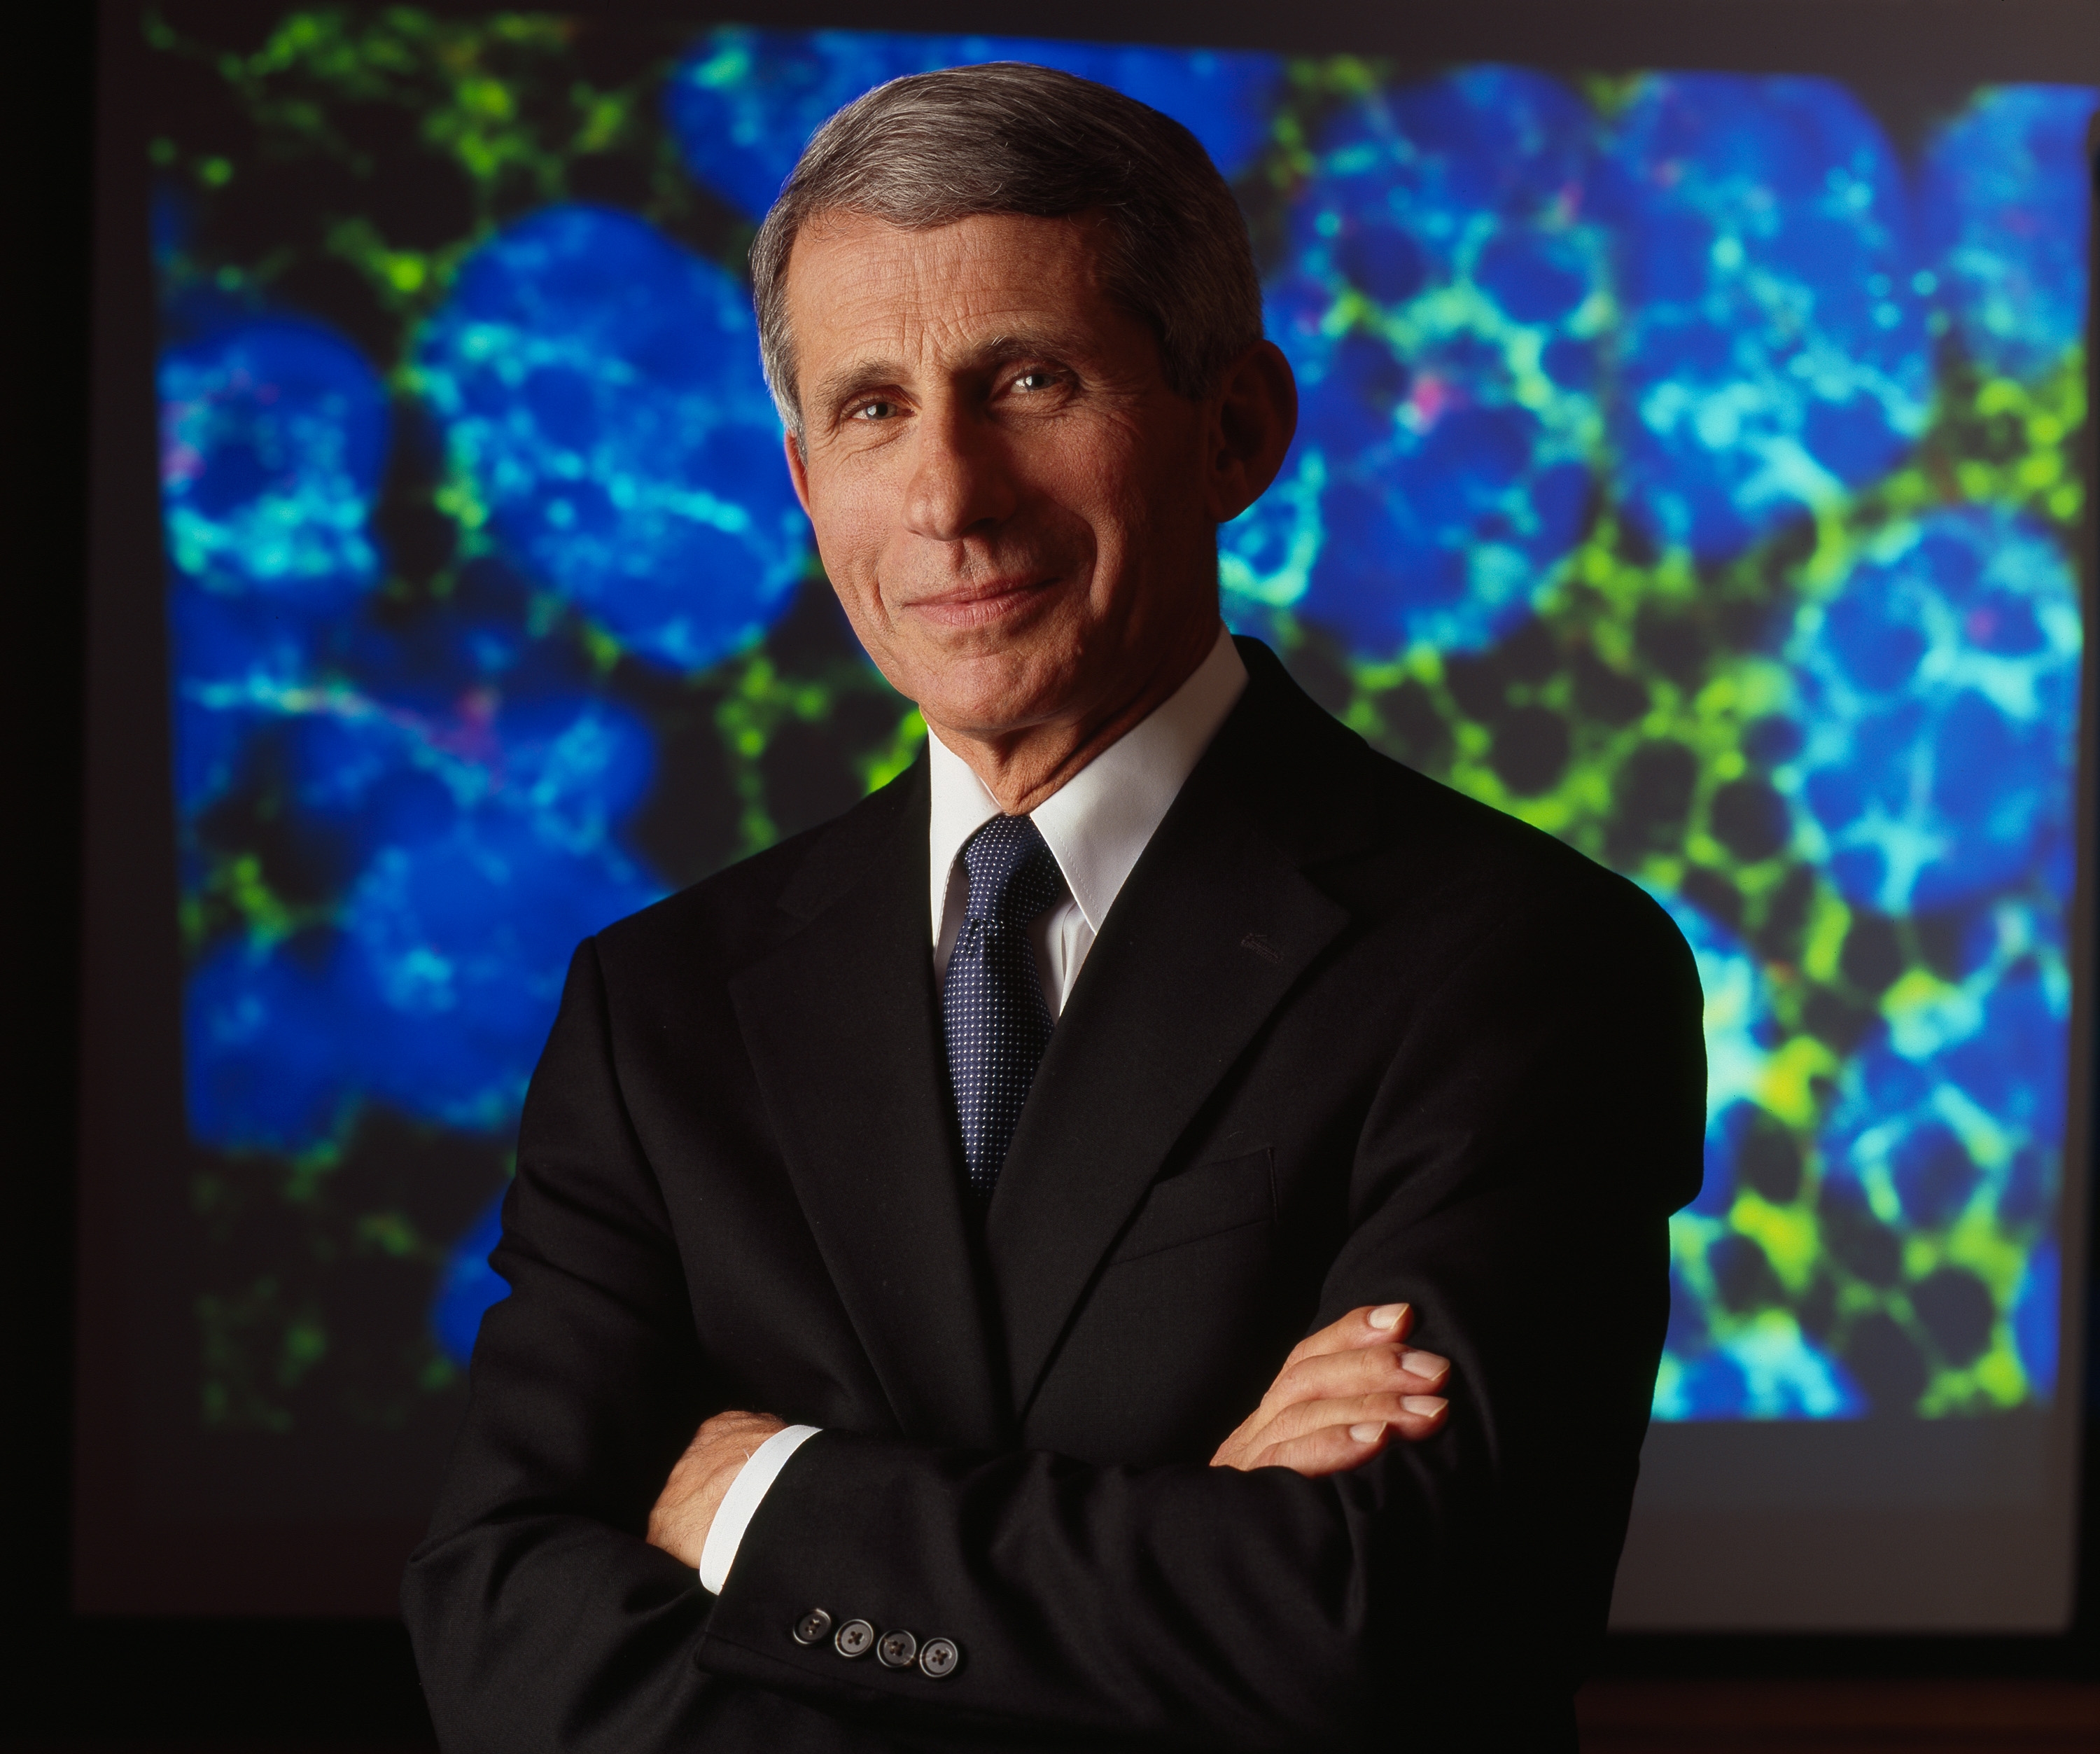 Newswise: Fauci Calls on Scientists to Help Rebuild Publics’ Trust in Science